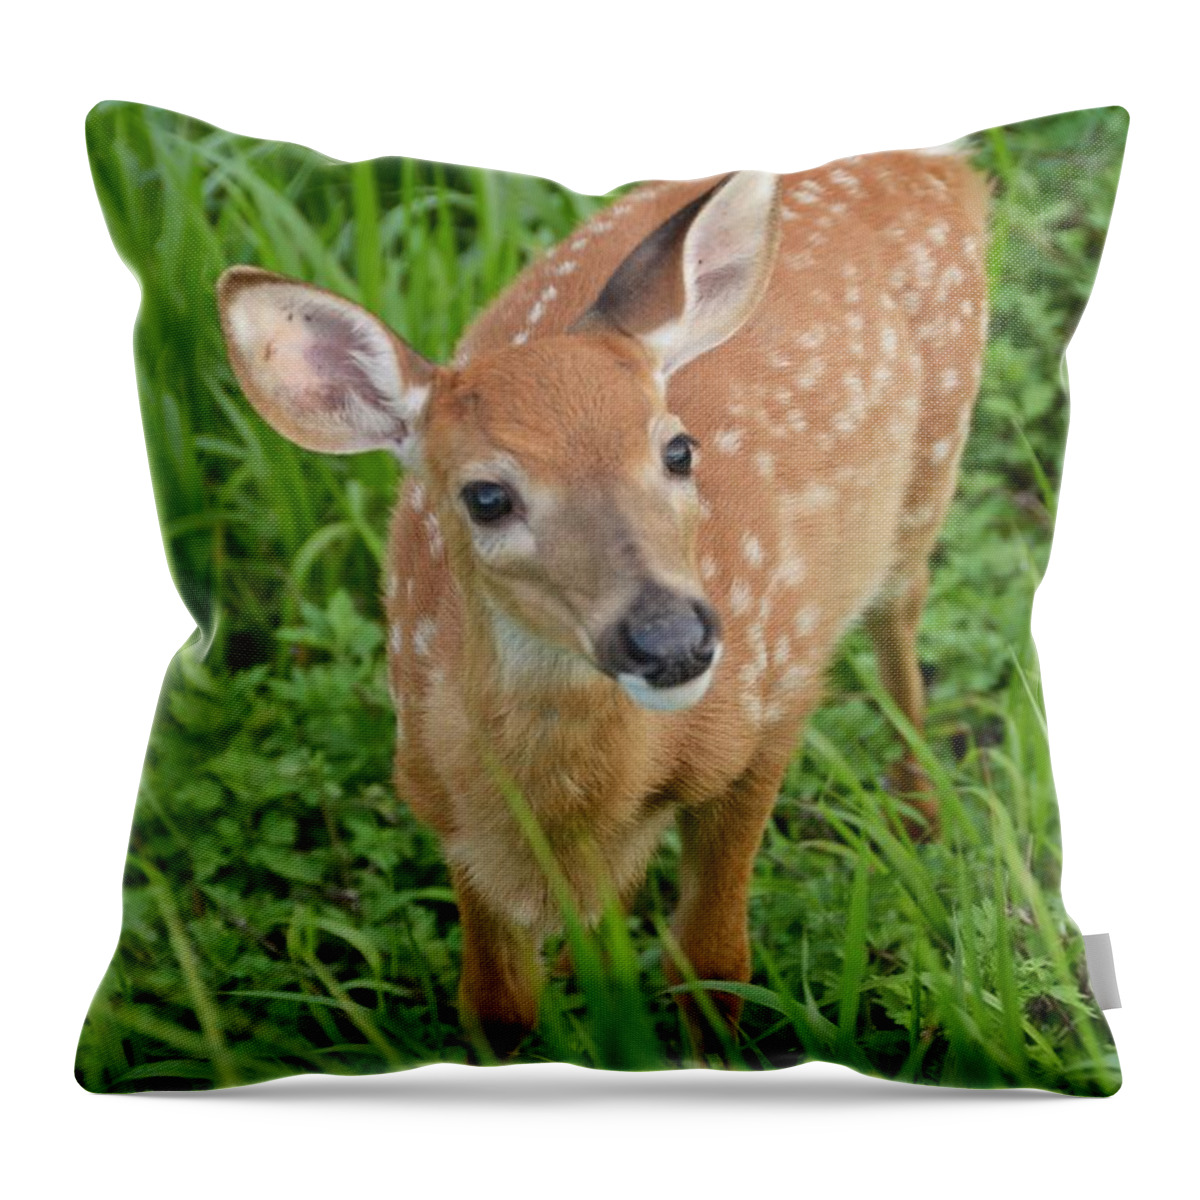 Deer Throw Pillow featuring the photograph Deer 42 by Cassie Marie Photography